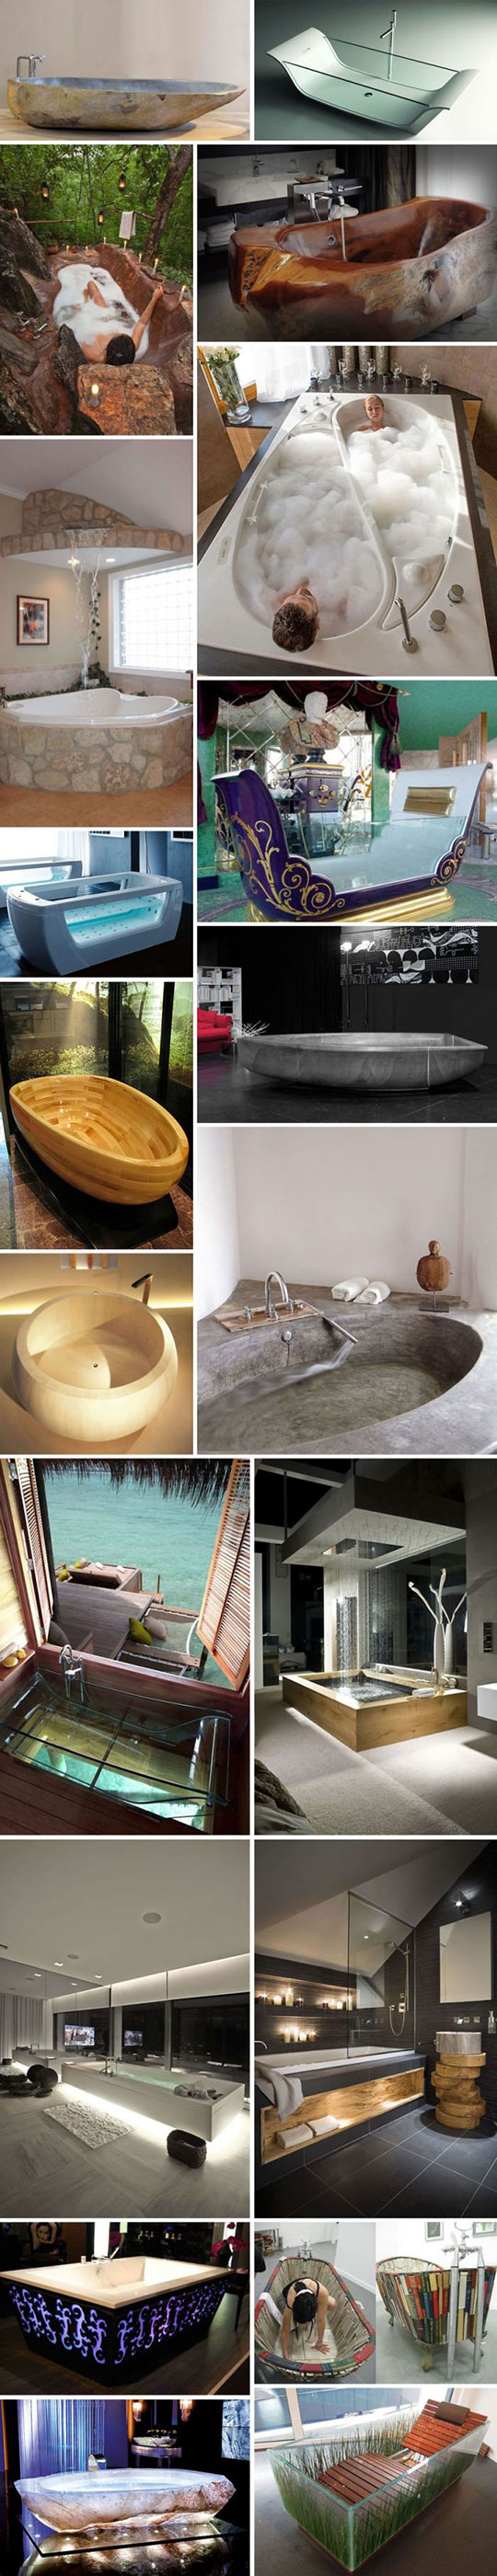 Bathtubs That Make You Want To Jump In